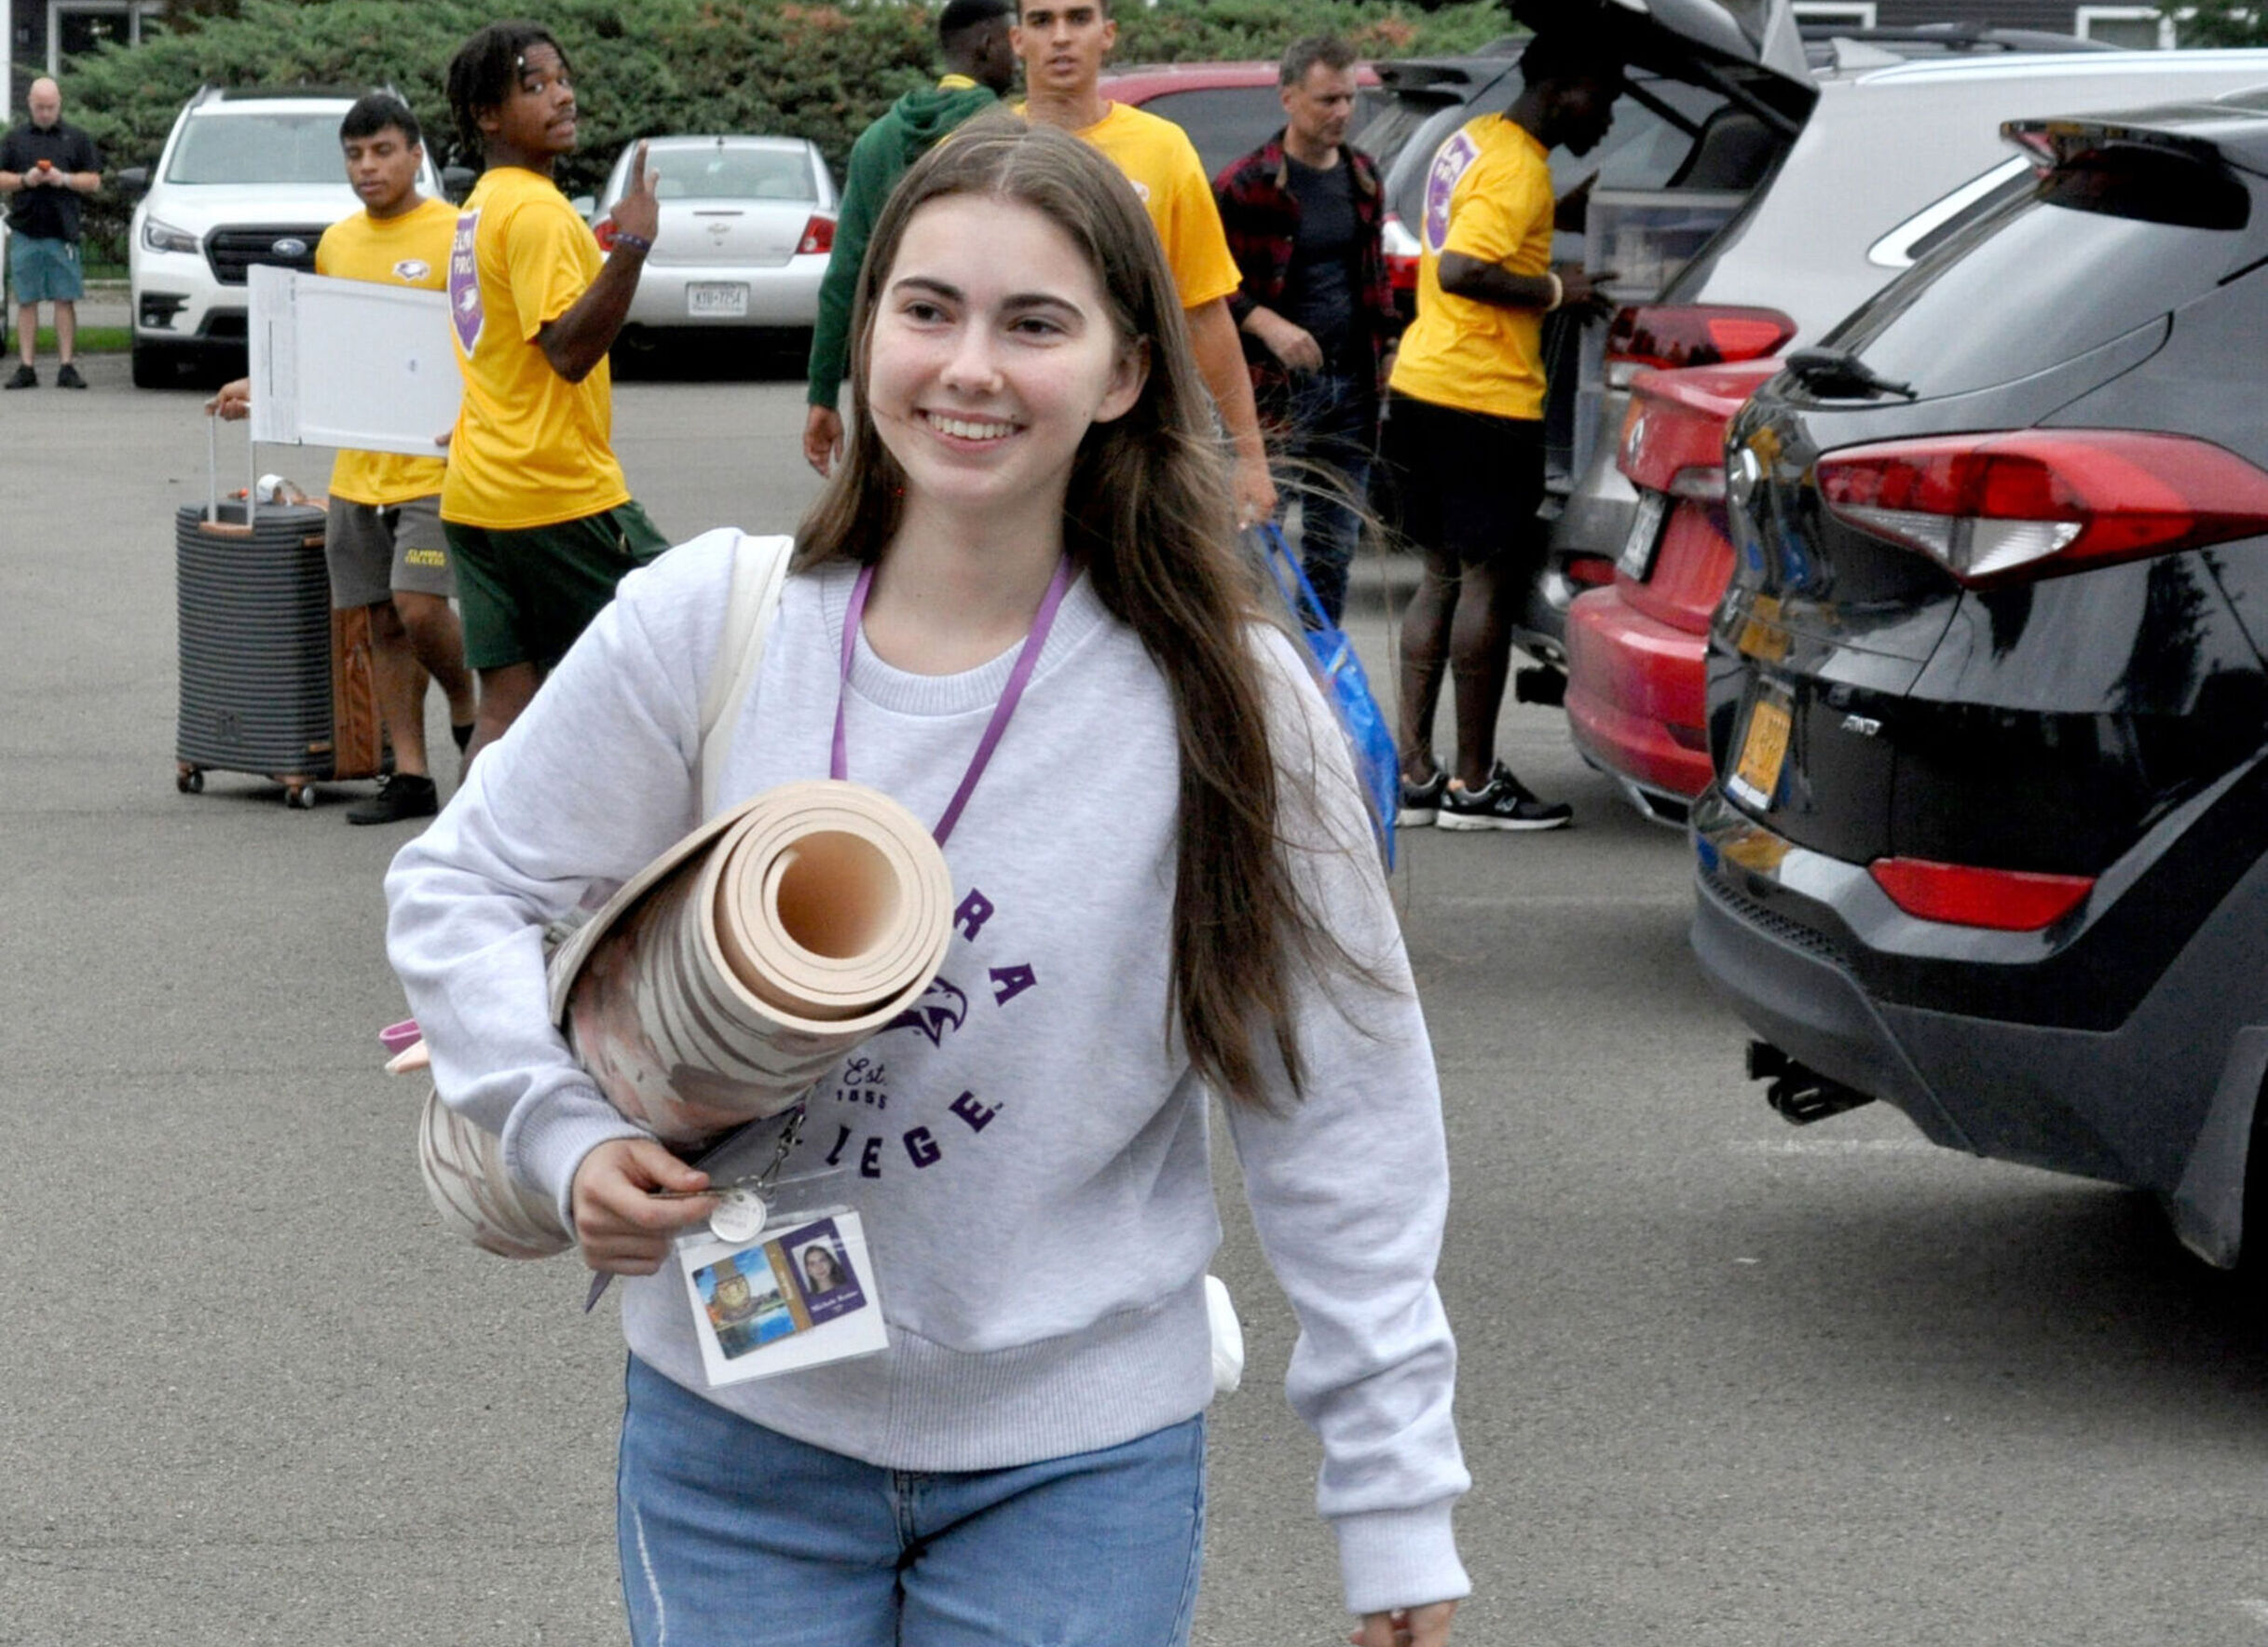 A new female student carries a rug across the parking lot during move-in day